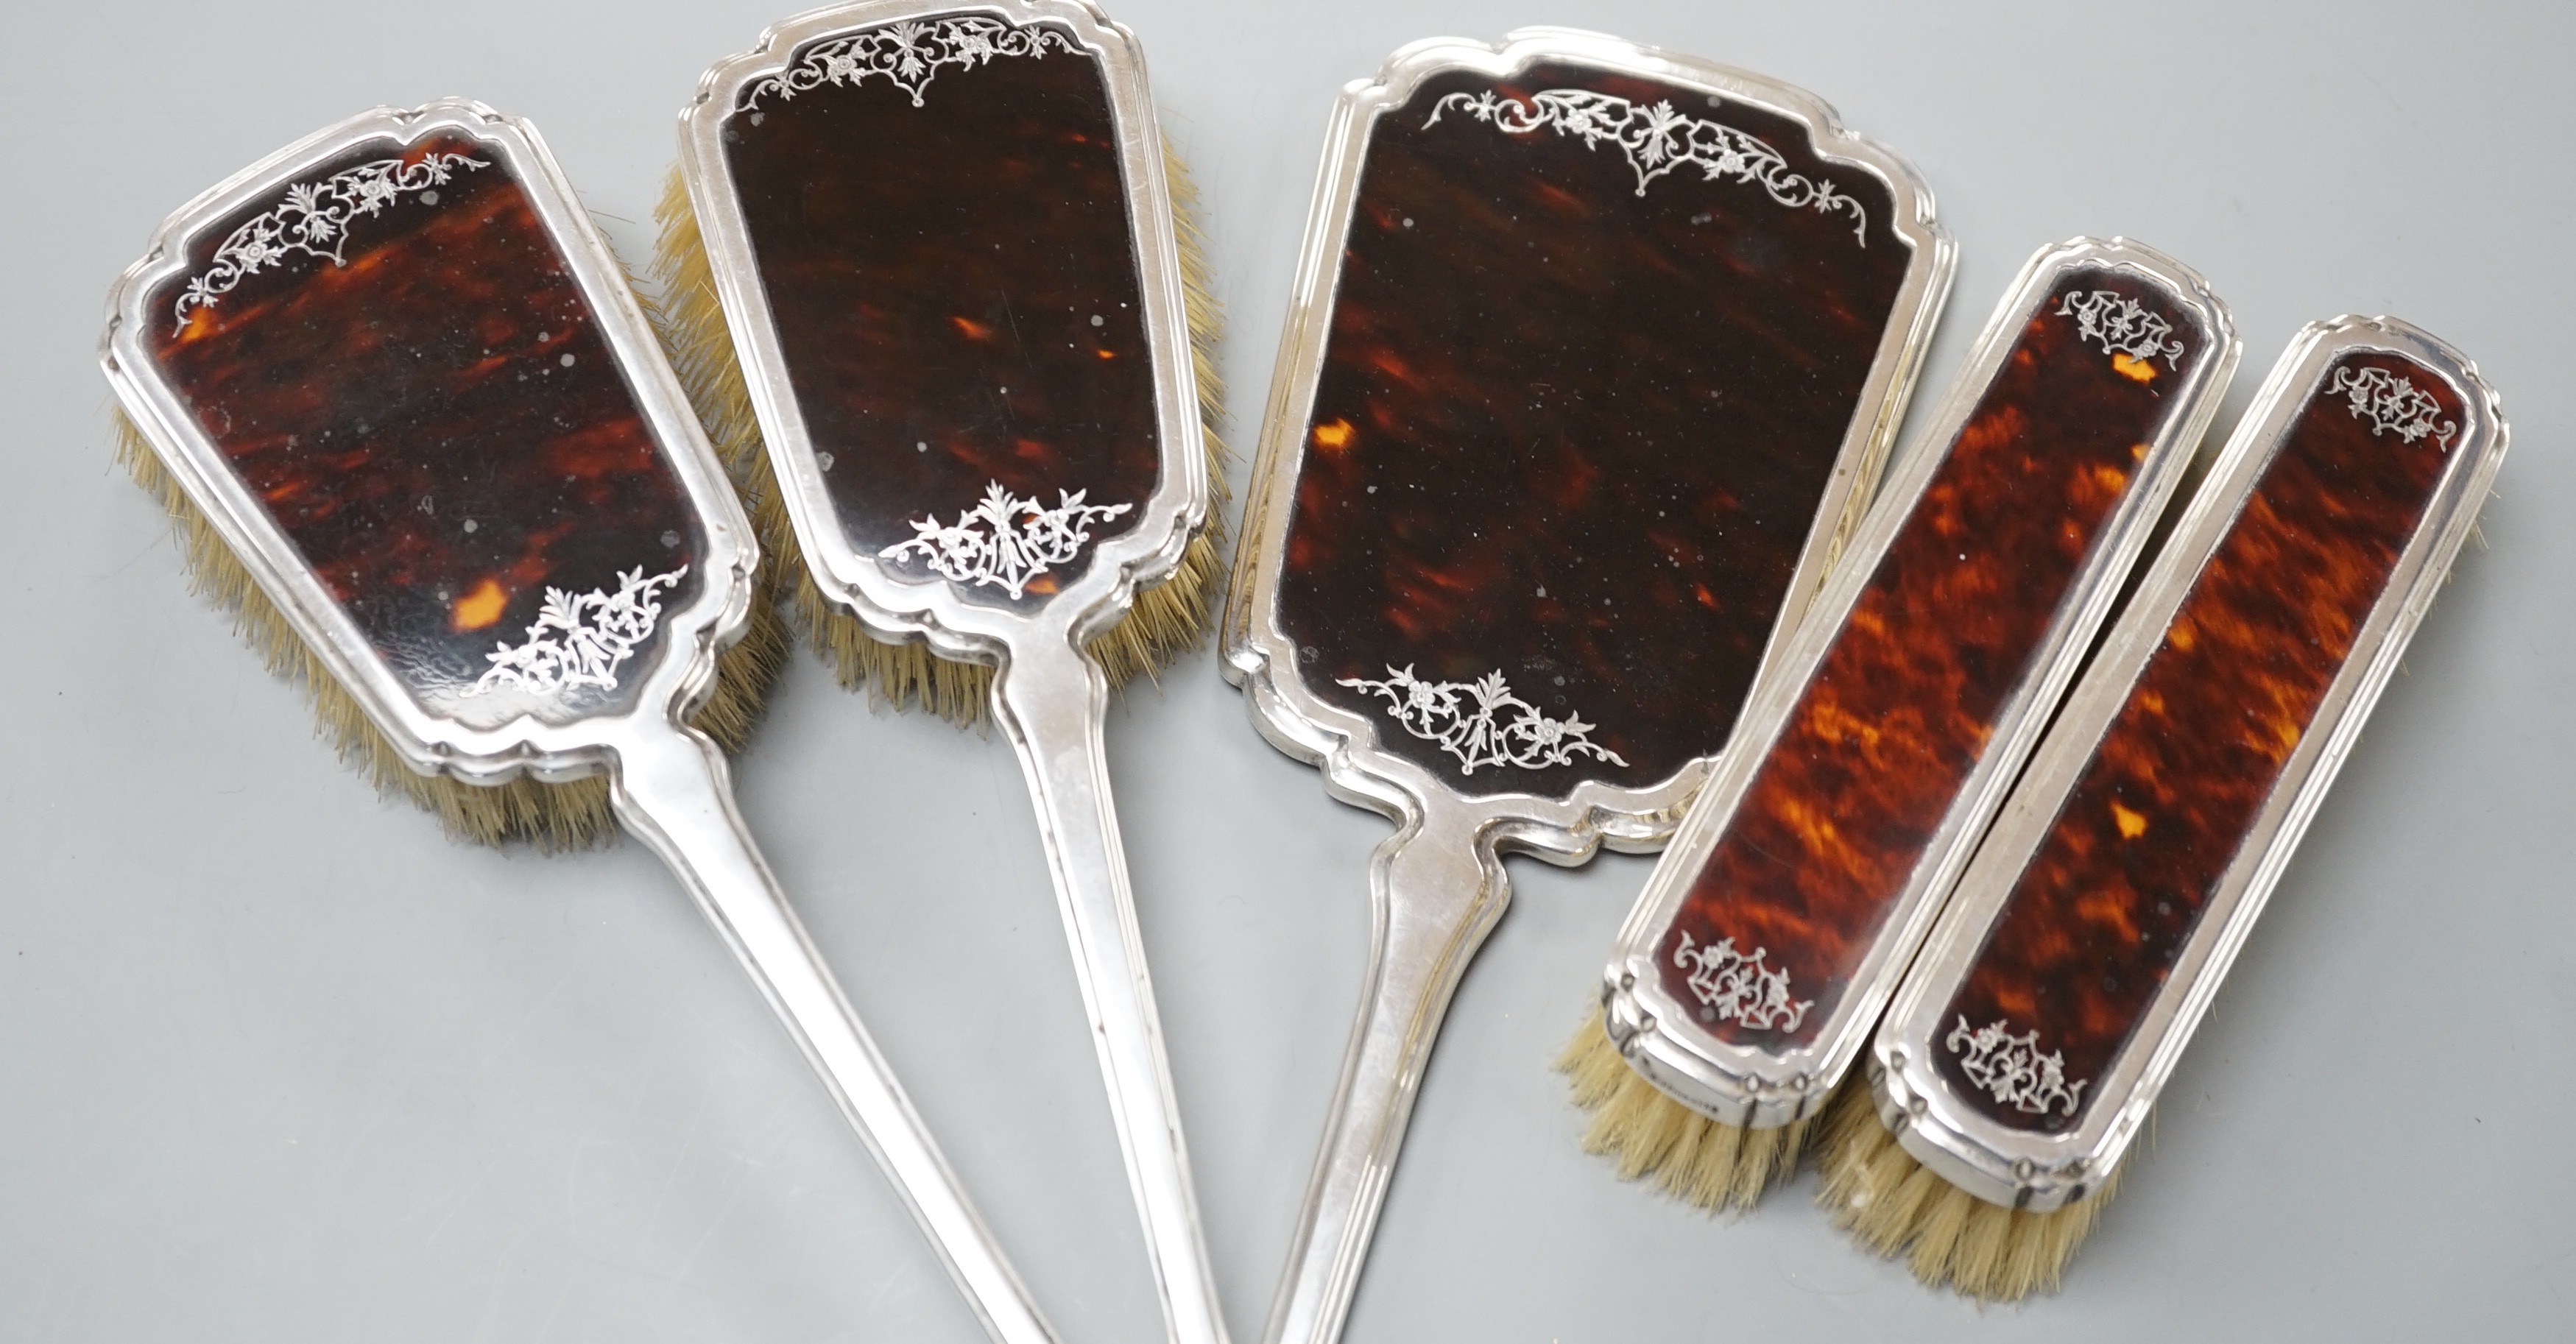 A George V silver and tortoiseshell mounted five piece mirror and brush set by Mappin & Webb, London, 1932/3.